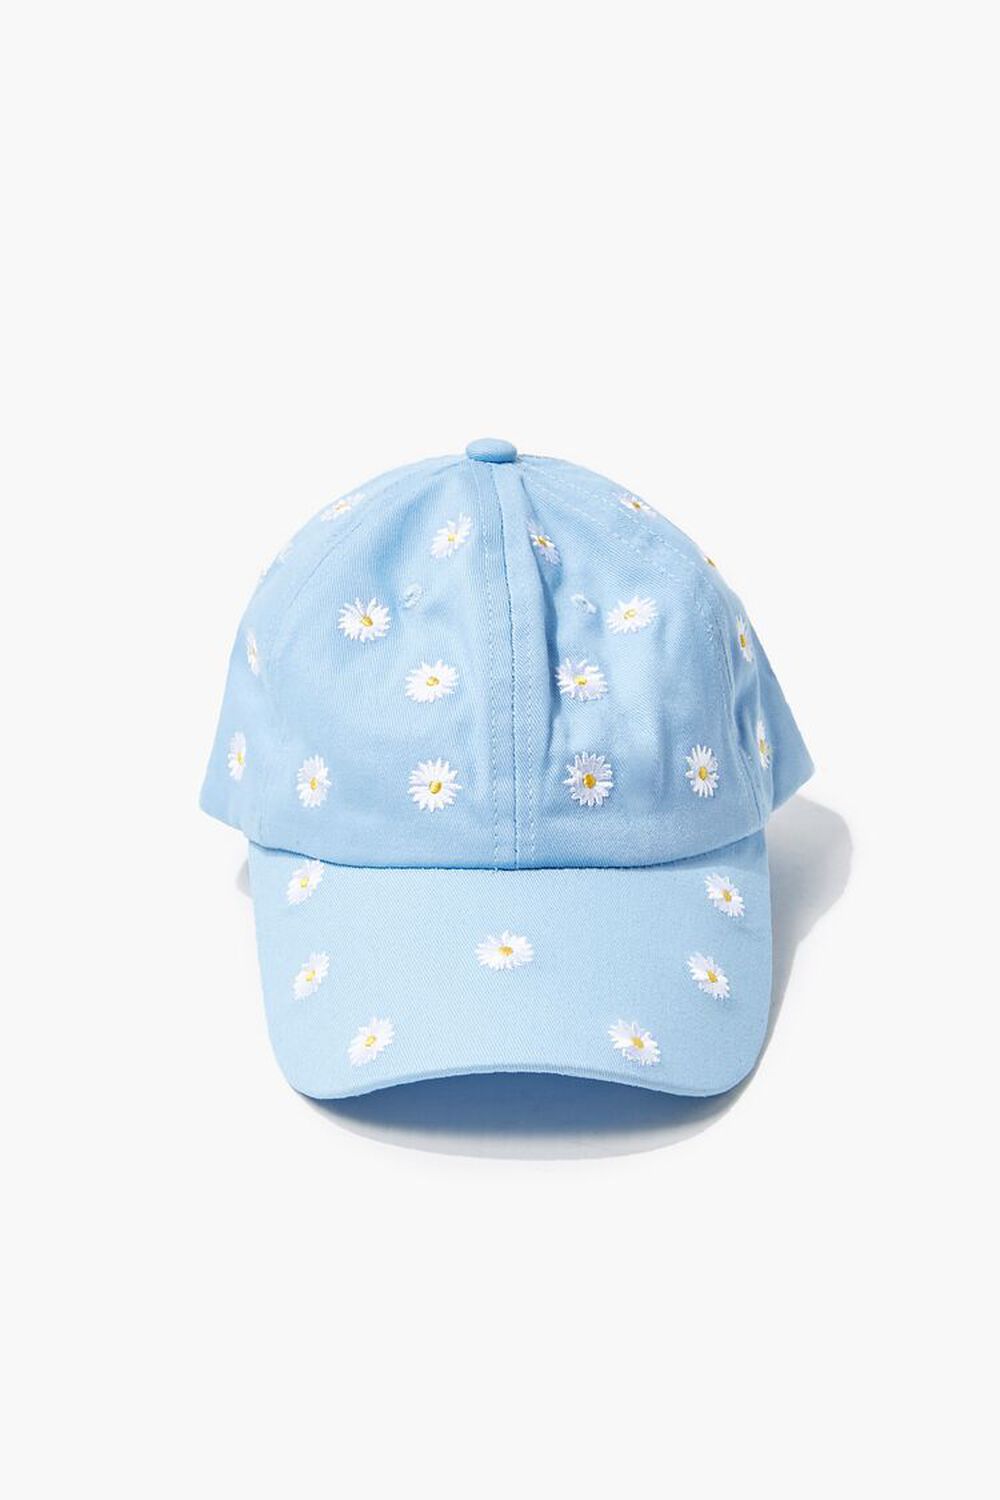 LIGHT BLUE/MULTI Embroidered Daisy Print Dad Cap, image 1